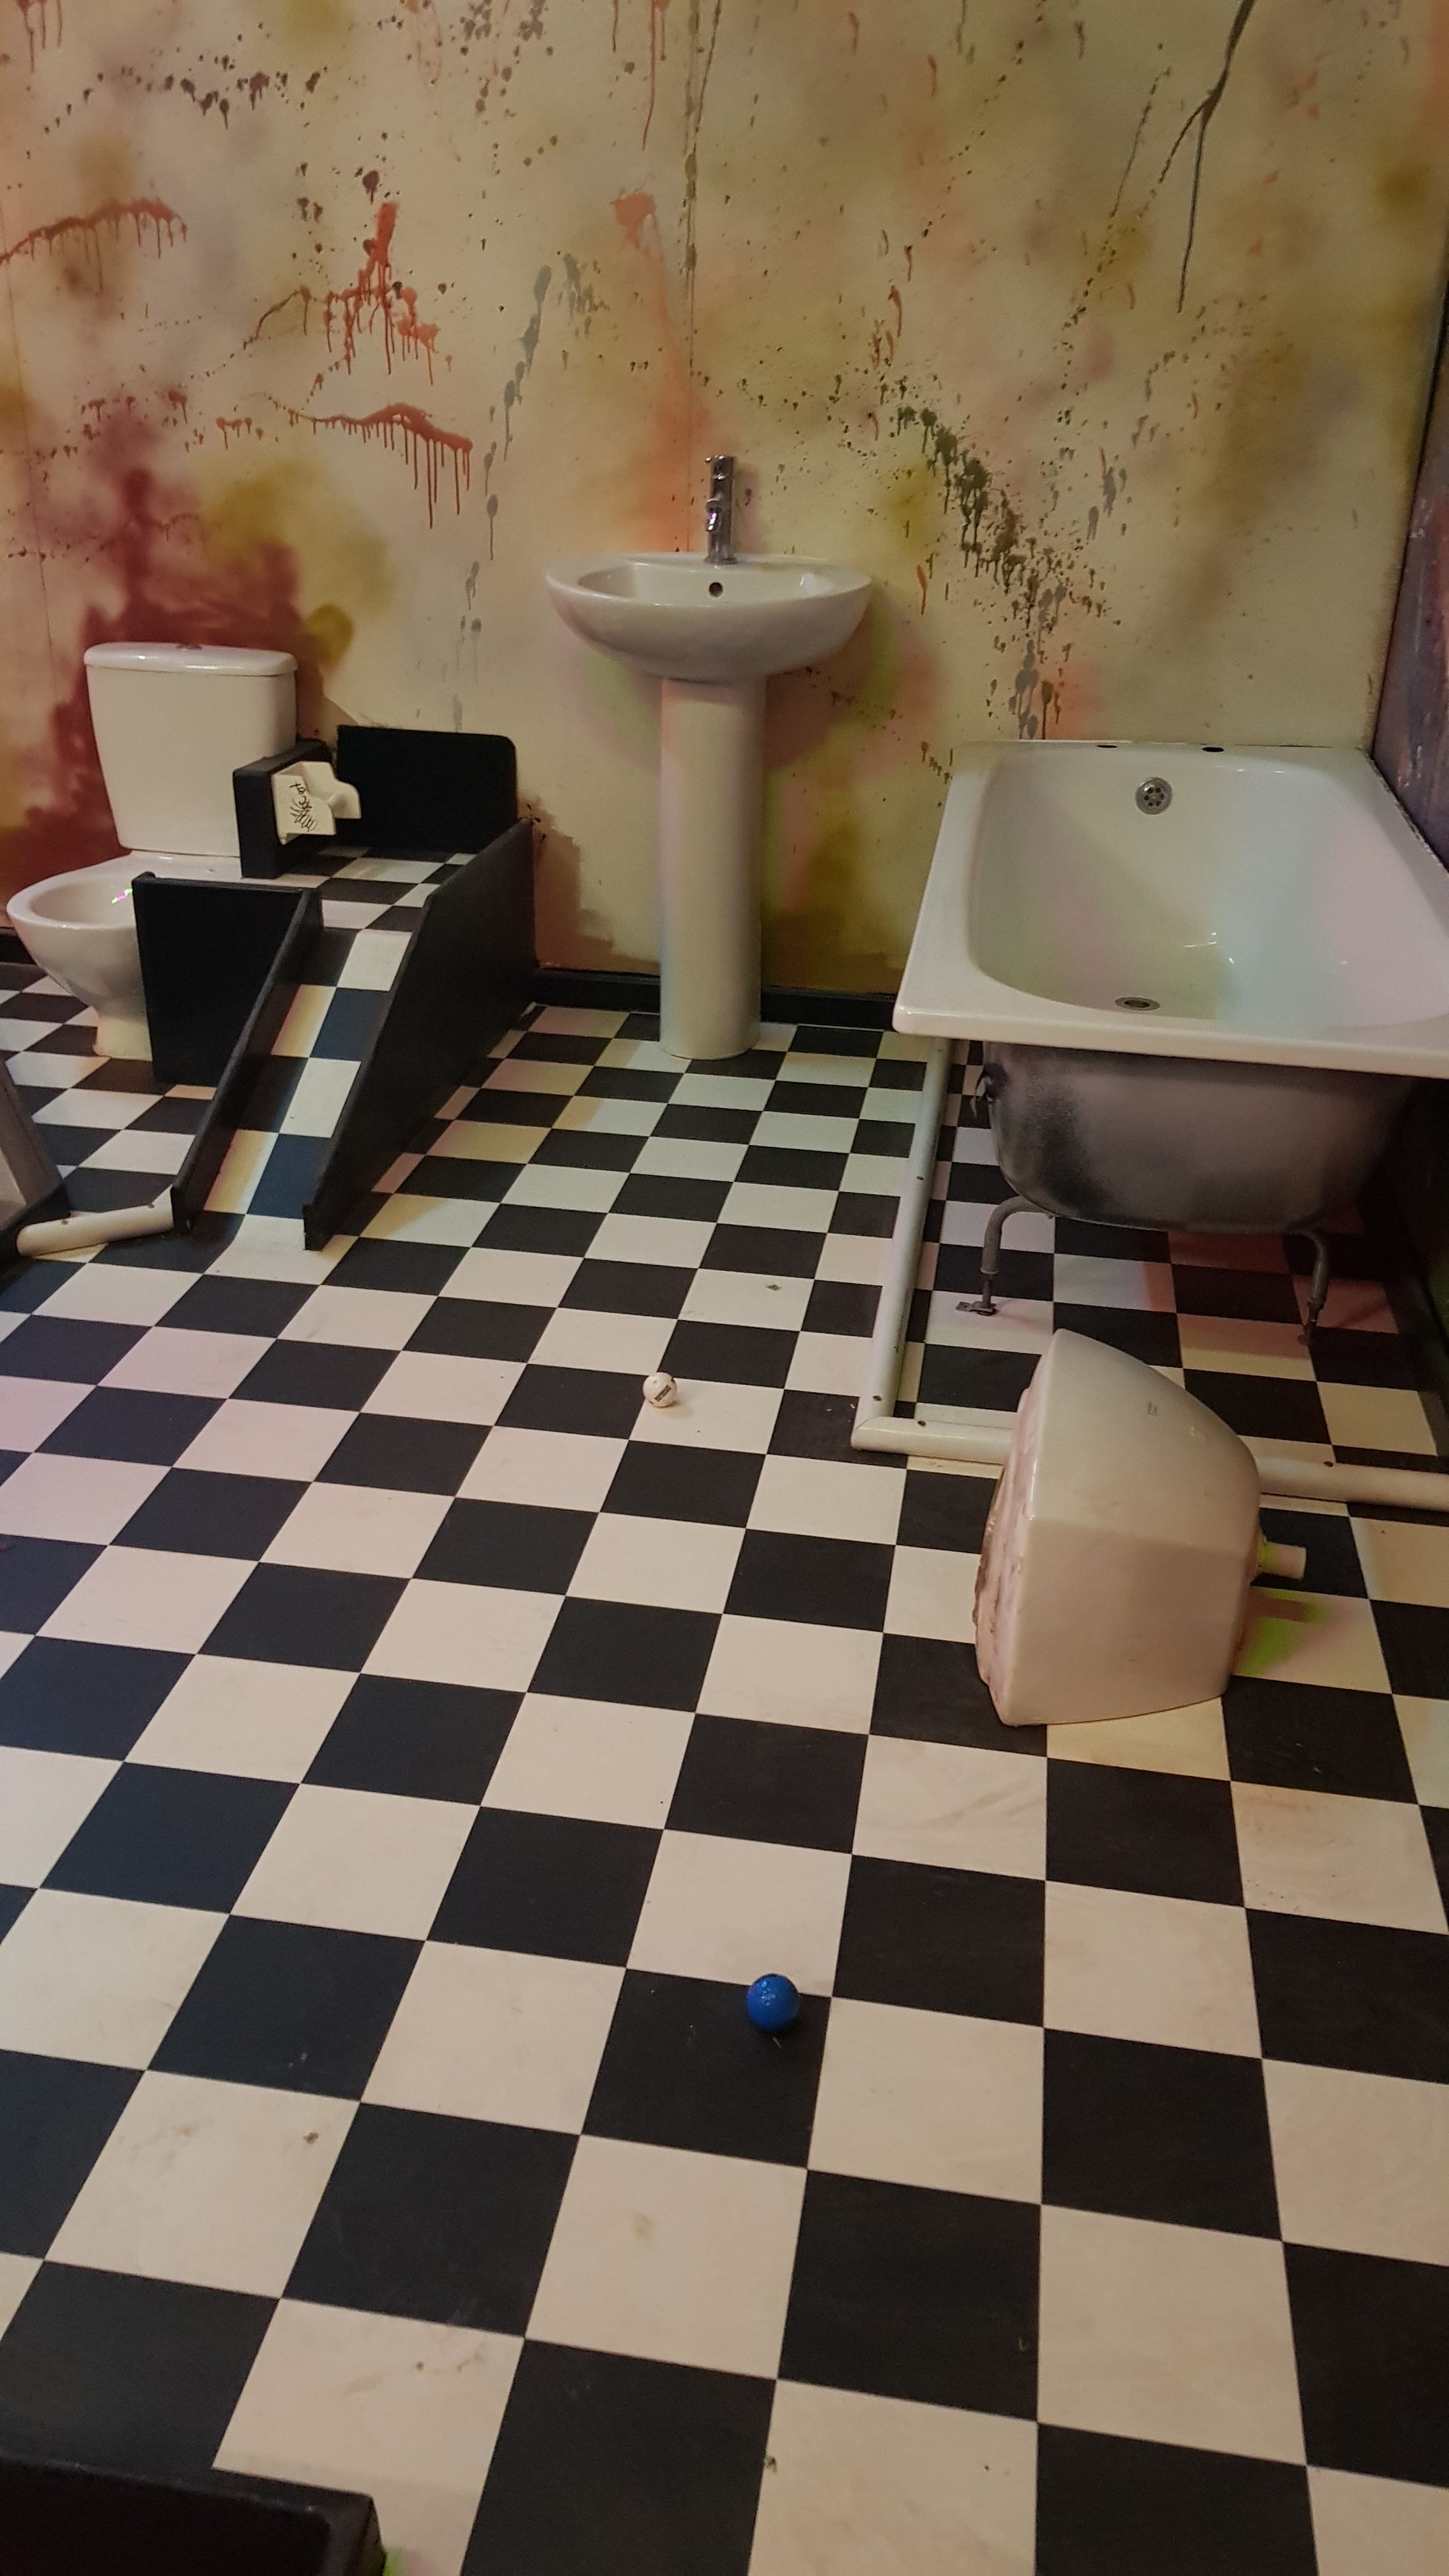 A black and white checkered floor and cream walls covered in stains. A bath , sink and toilet are in the room with a ramp going up next to the toilet to get the ball into the hole which is built into the toilet.